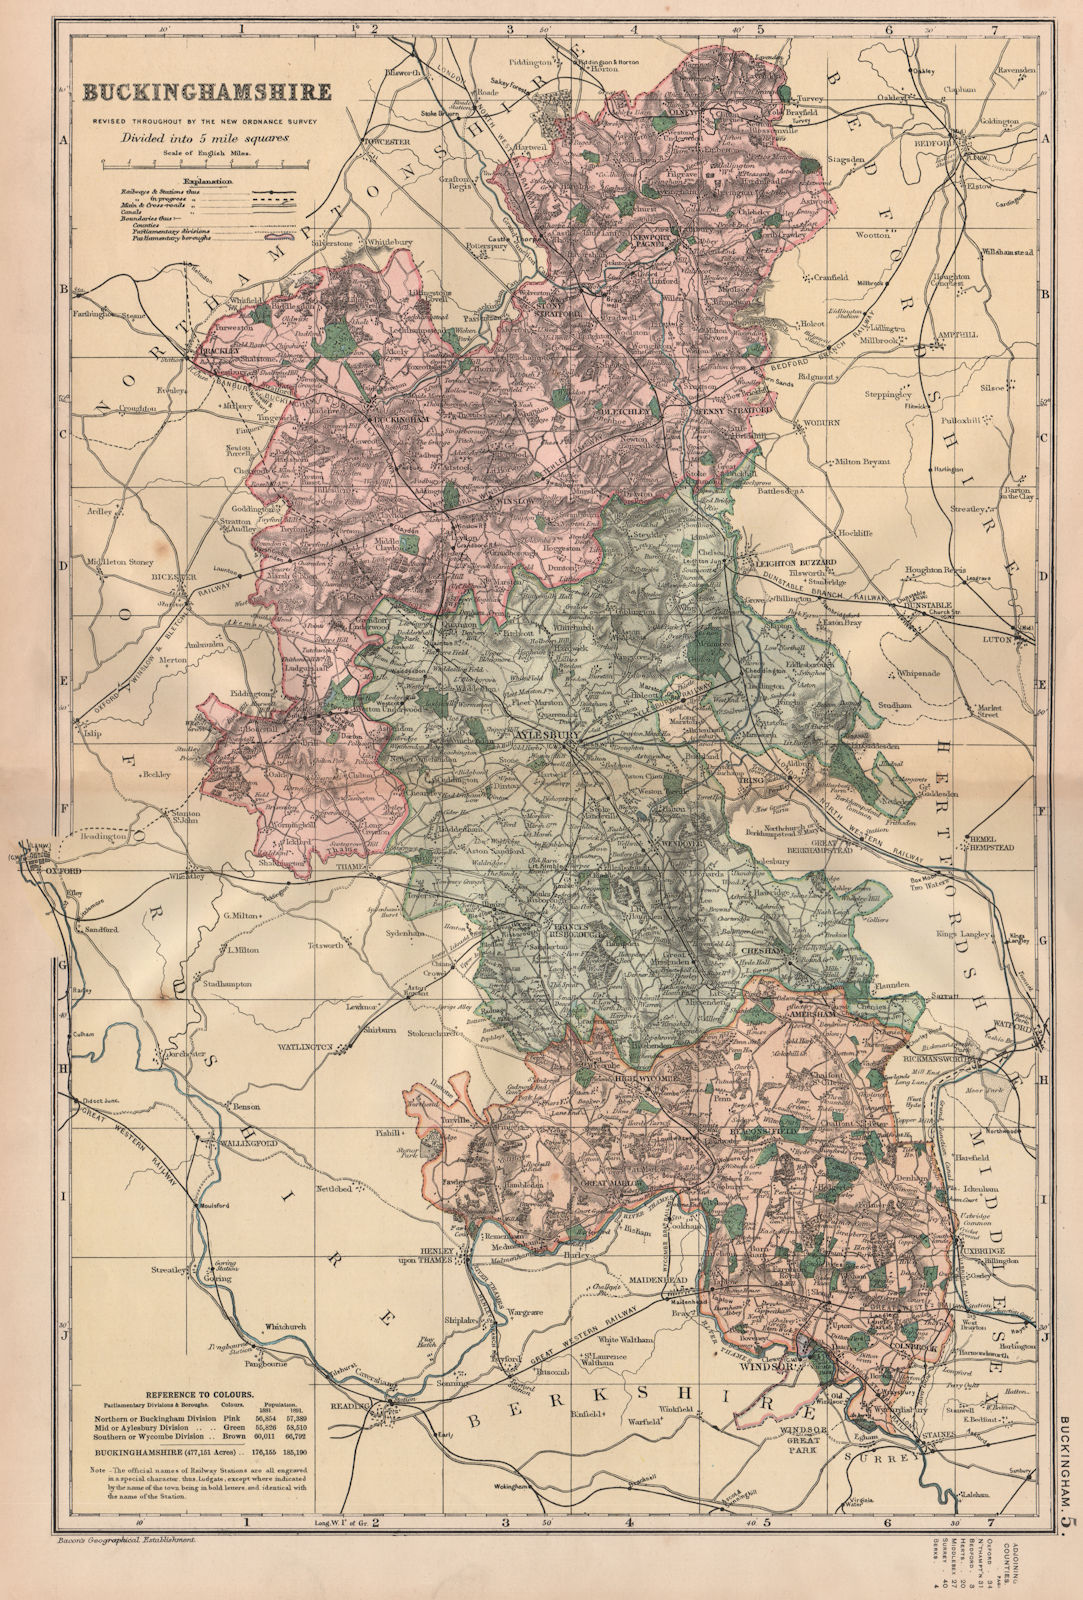 BUCKINGHAMSHIRE.Showing Parliamentary divisions,boroughs & parks.BACON 1896 map